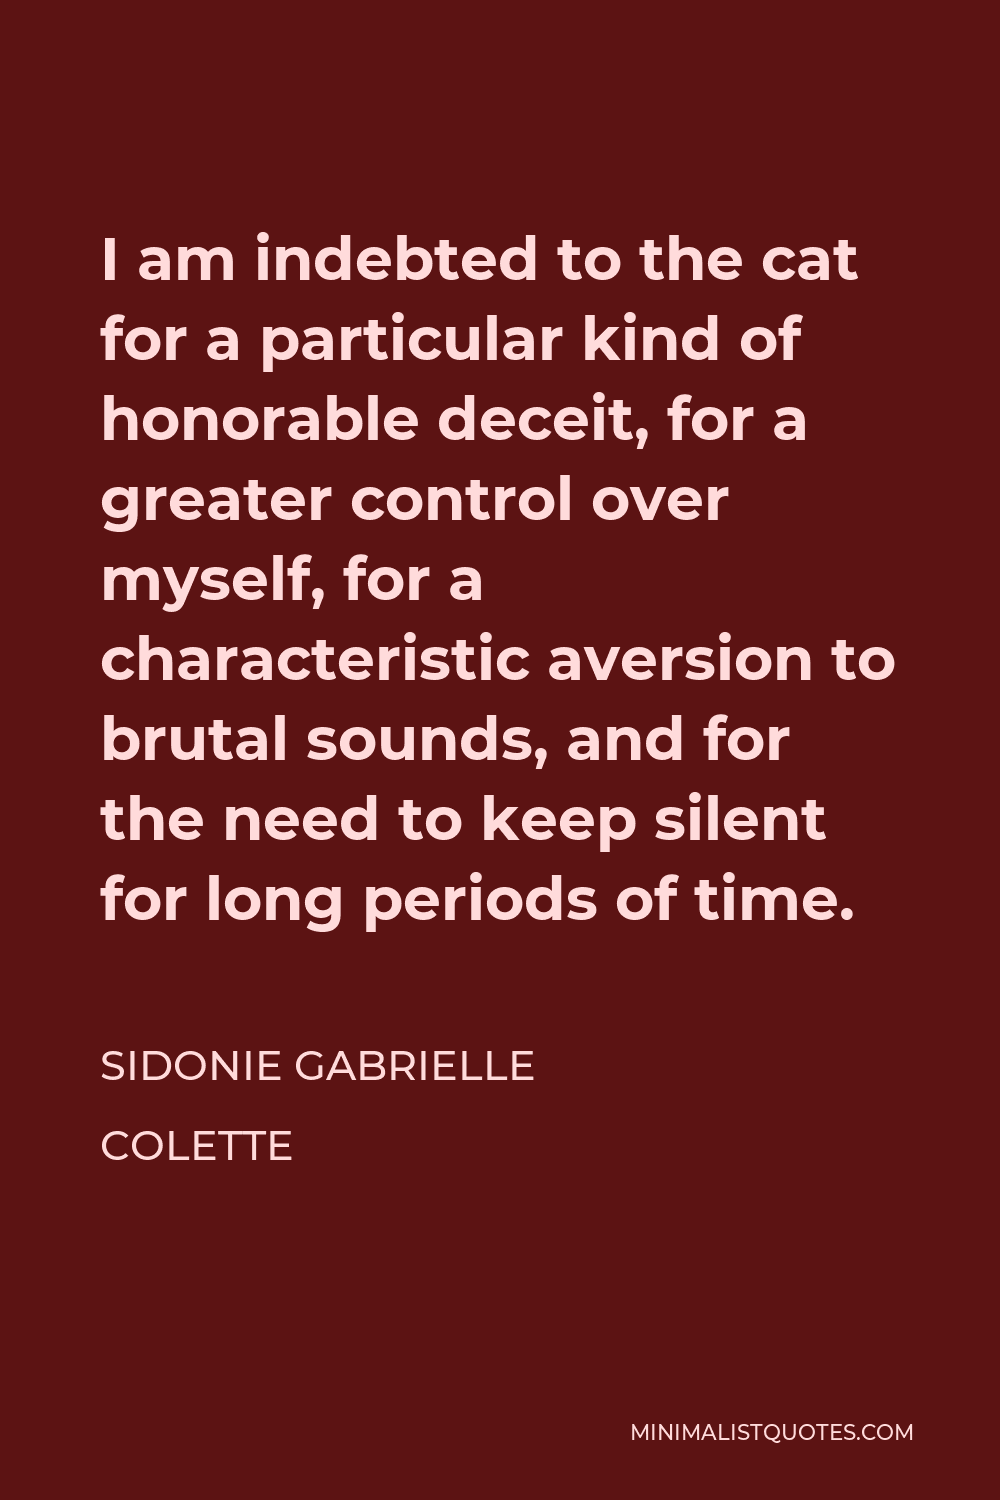 Sidonie Gabrielle Colette Quote - I am indebted to the cat for a particular kind of honorable deceit, for a greater control over myself, for a characteristic aversion to brutal sounds, and for the need to keep silent for long periods of time.